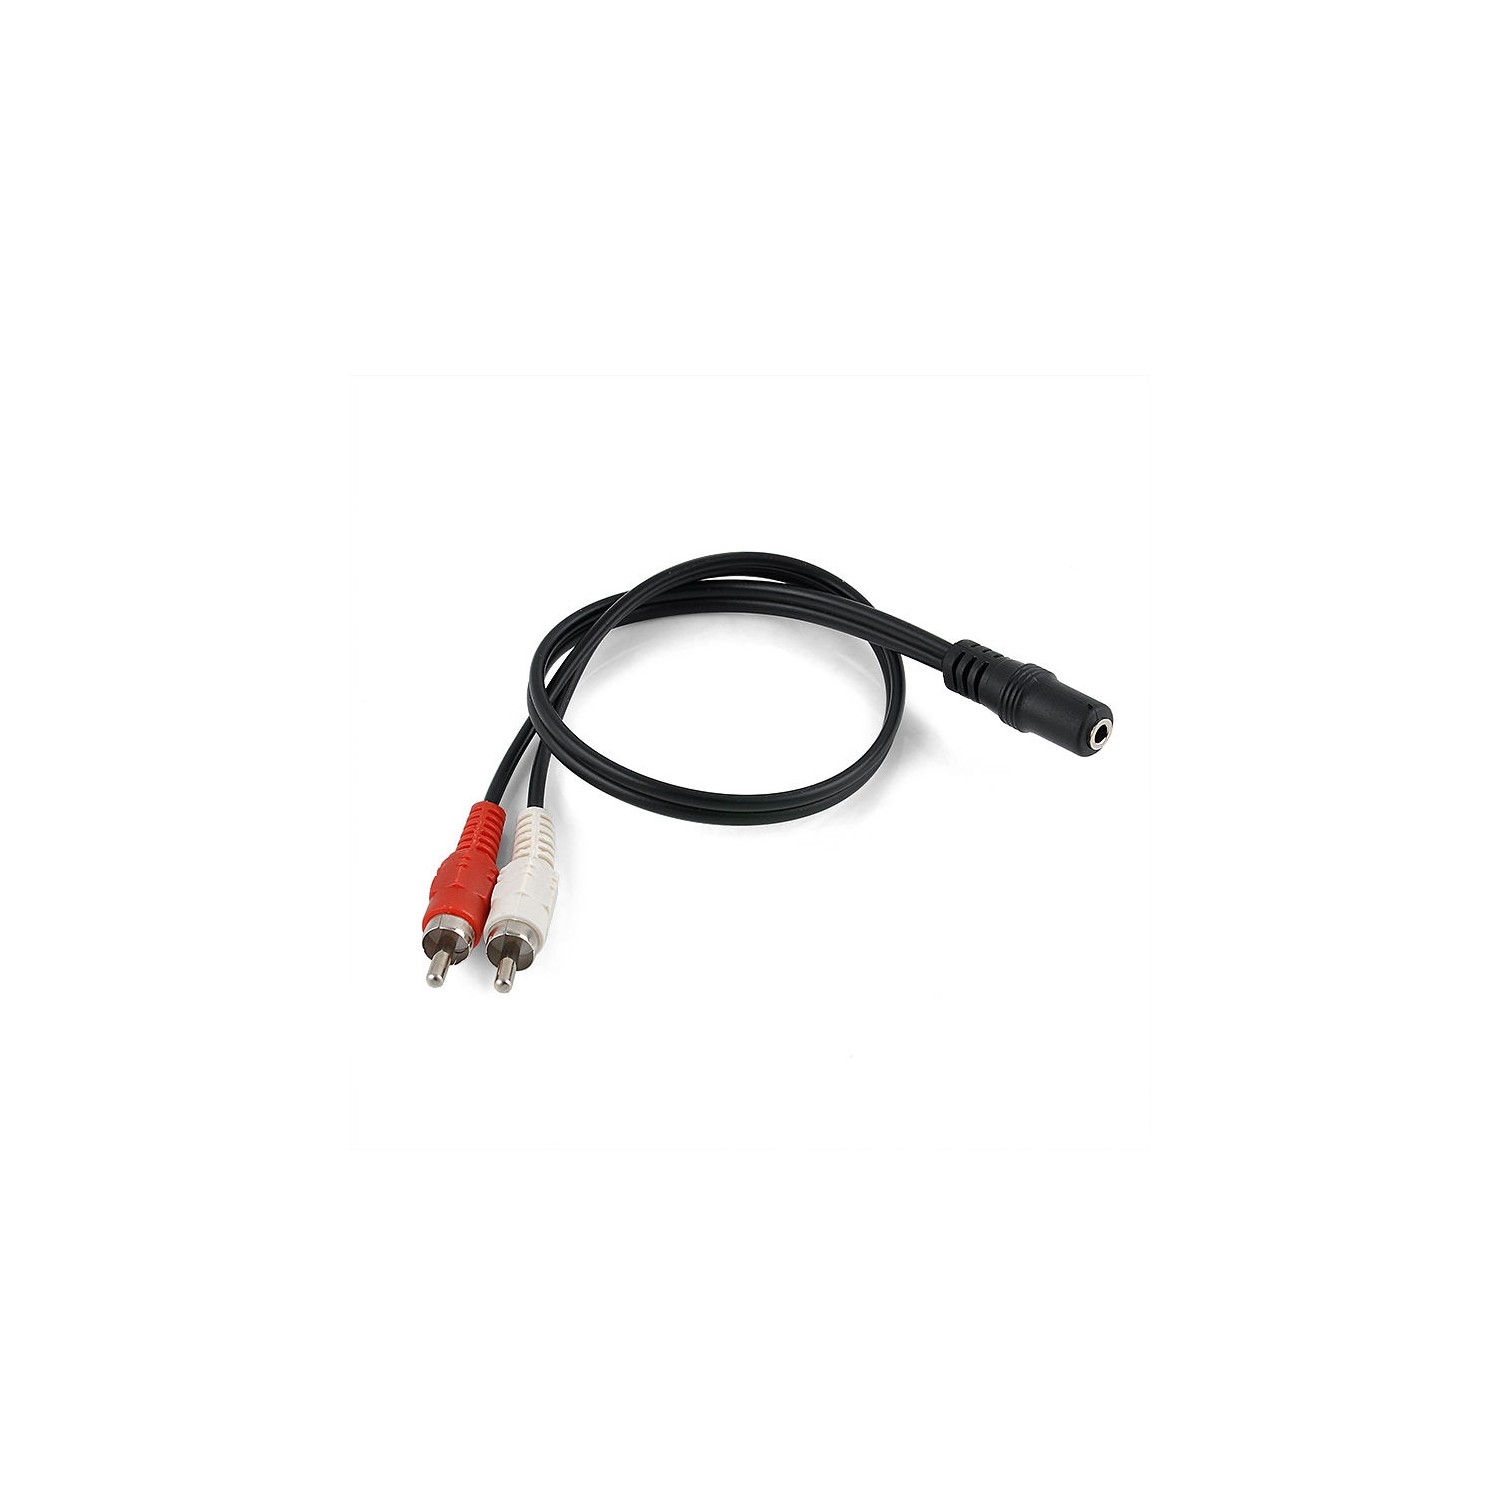 axGear axGear 3.5mm Female To 2 RCA Male Y Stereo Audio Jack Cable Aux Adapter Connector Plug F/M